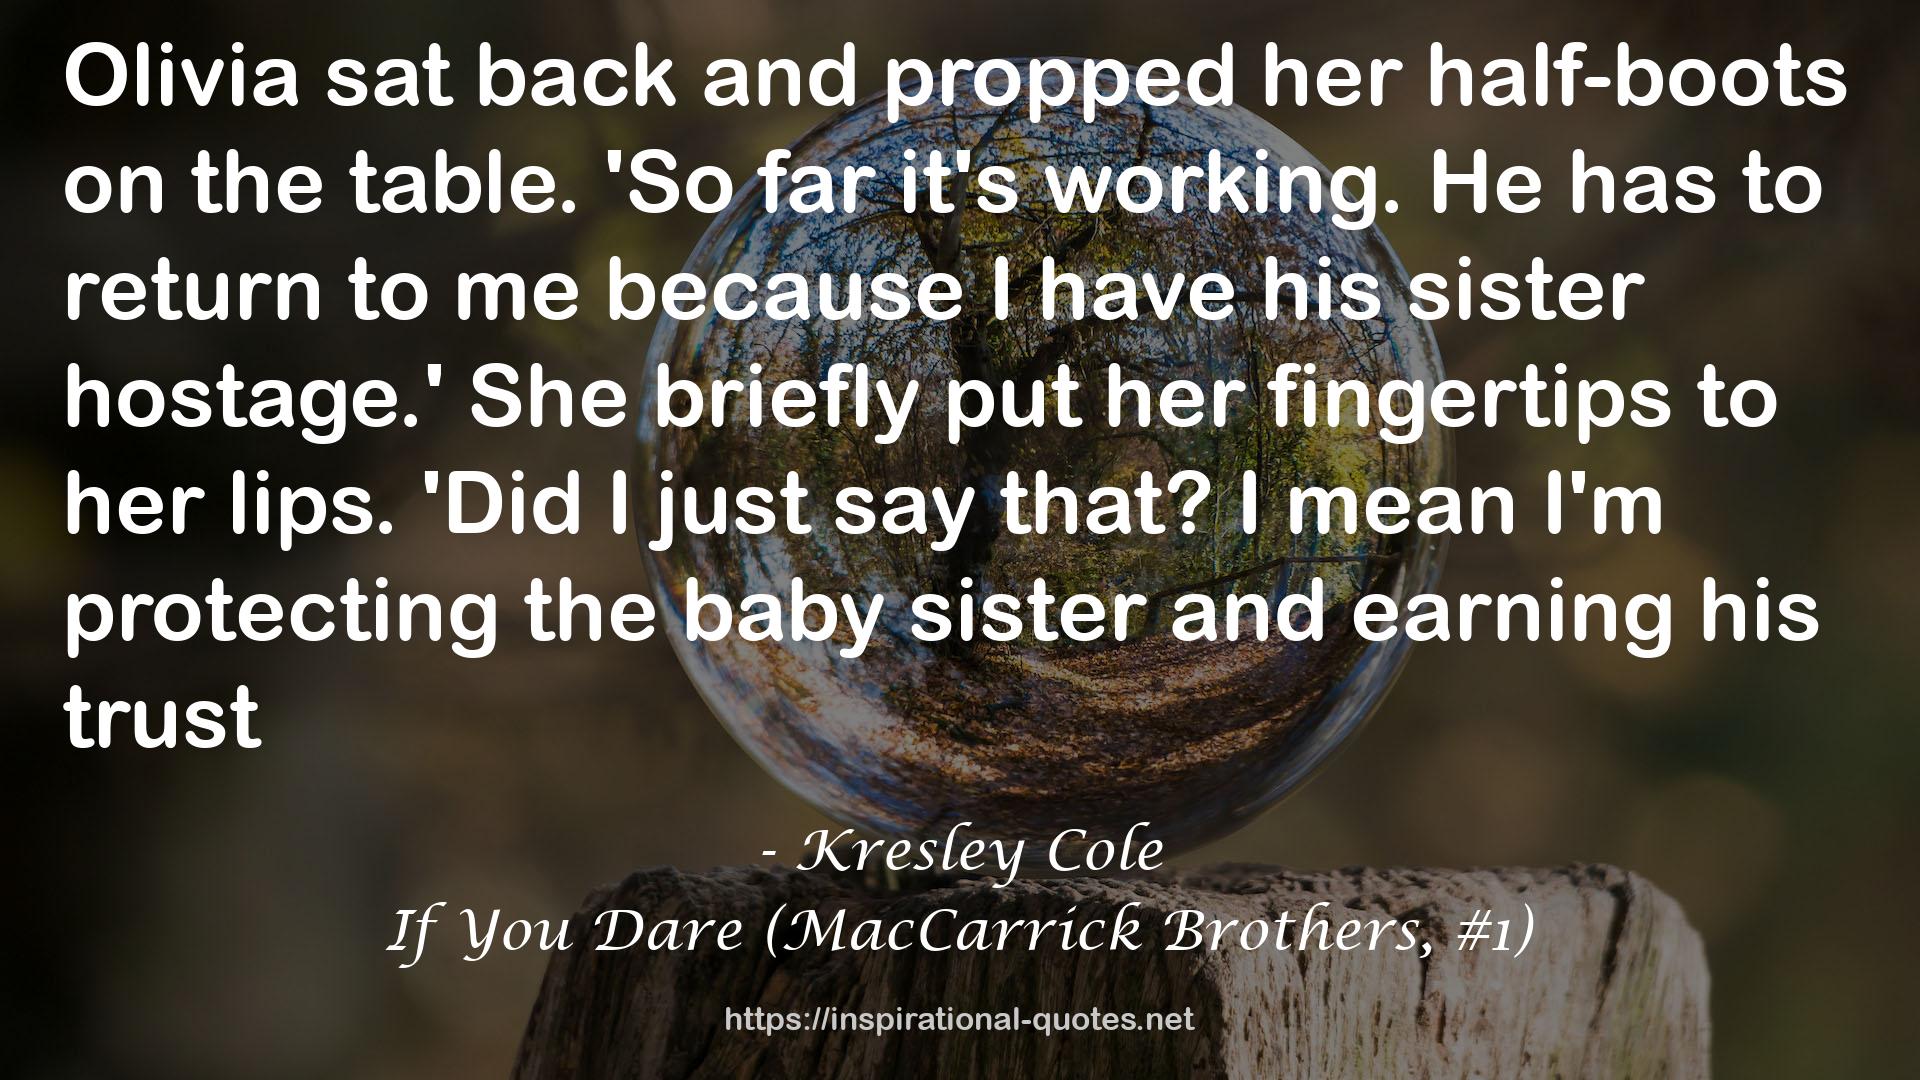 If You Dare (MacCarrick Brothers, #1) QUOTES